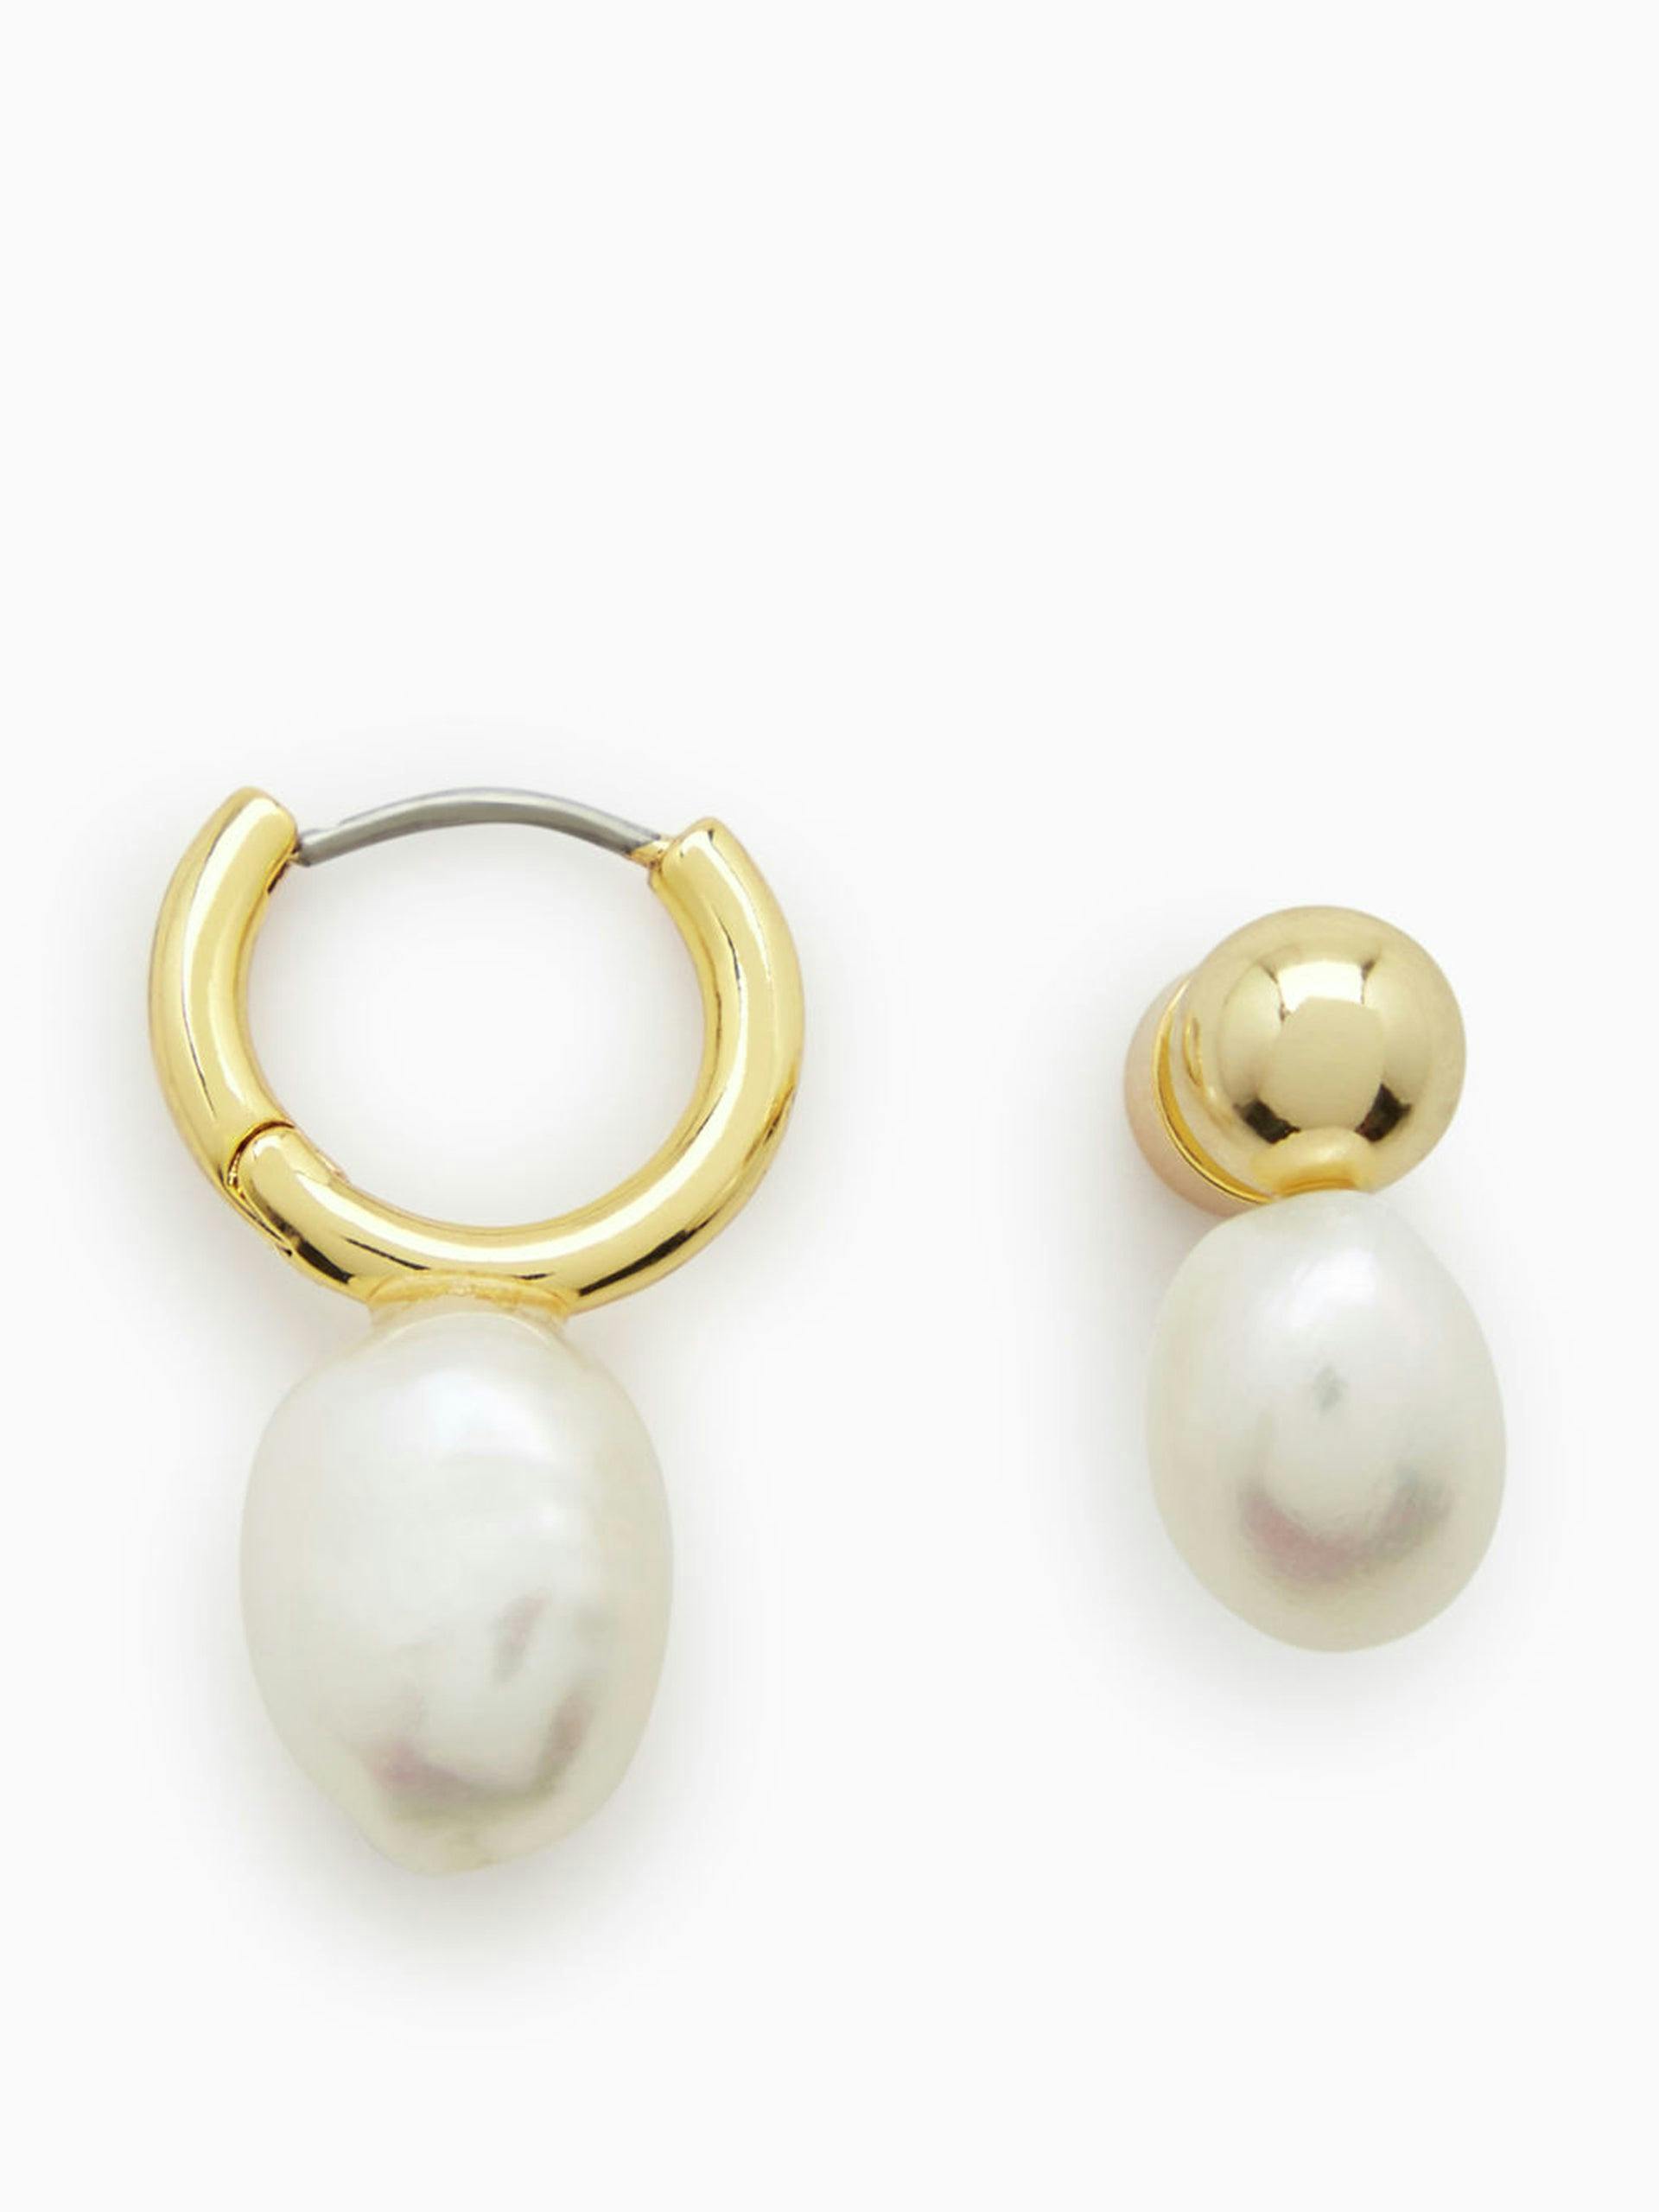 Mismatched pearl earrings